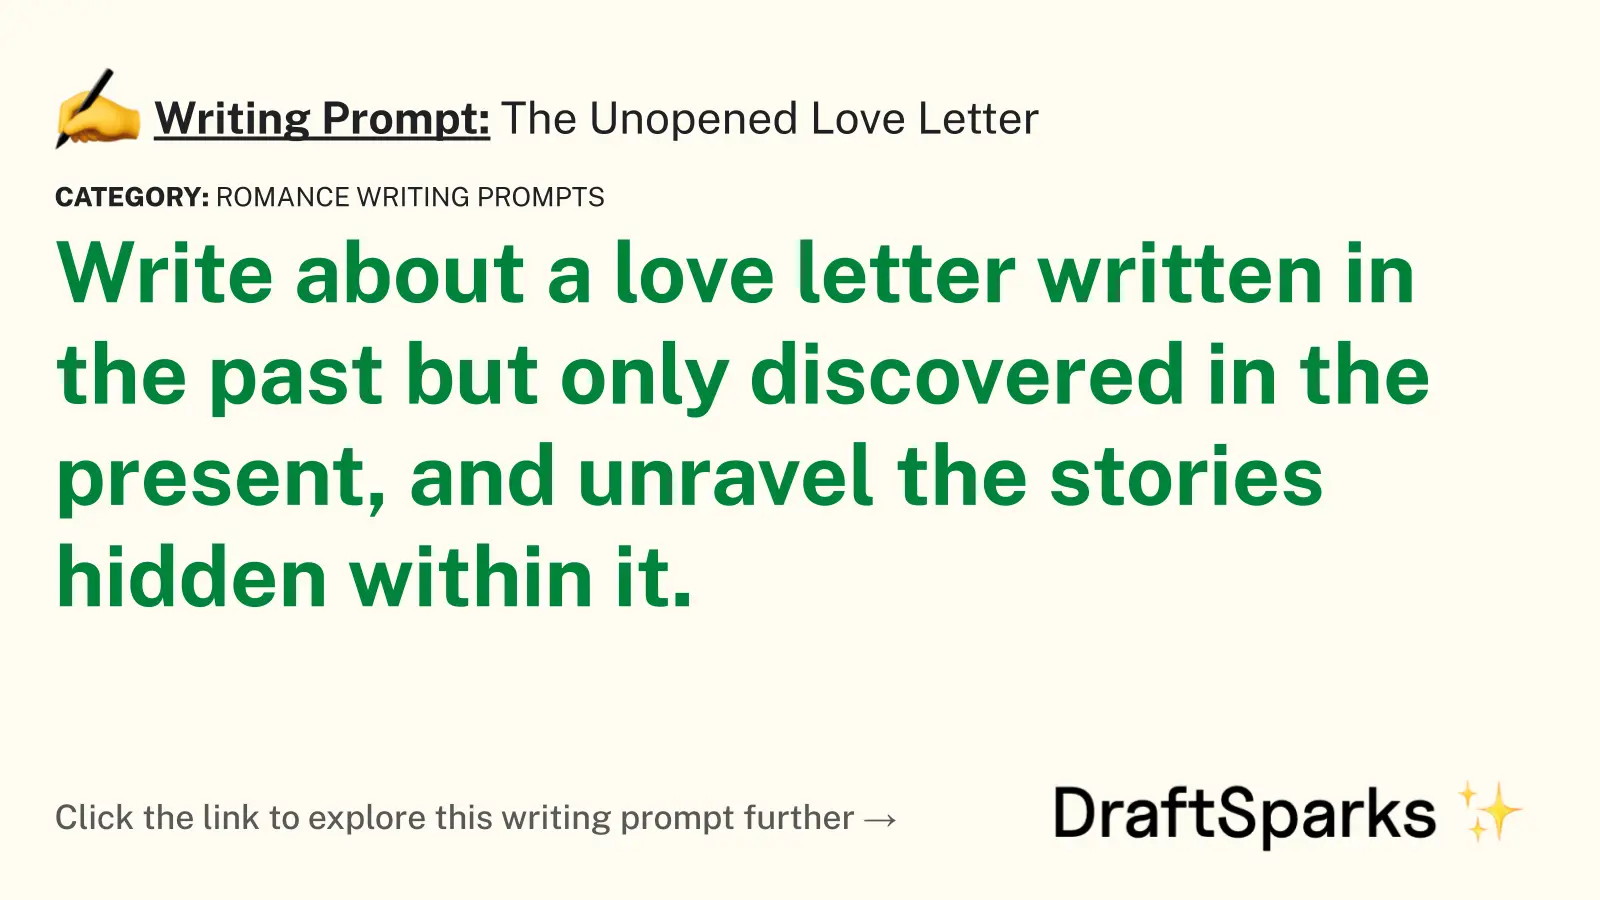 The Unopened Love Letter